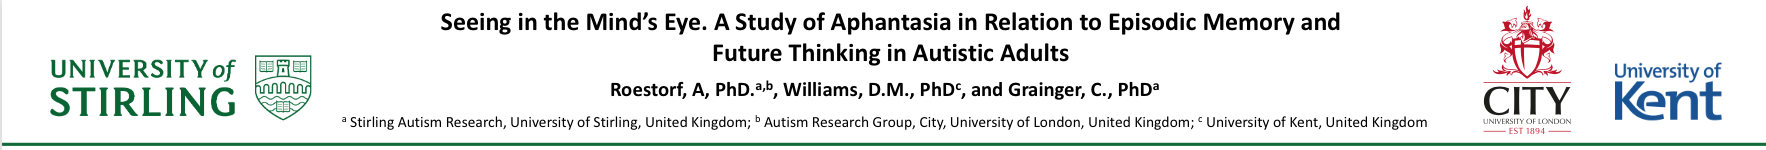 INSAR poster: Seeing in the Mind’s Eye. A Study of Aphantasia in Relation to Episodic Memory and Future Thinking in Autistic Adults